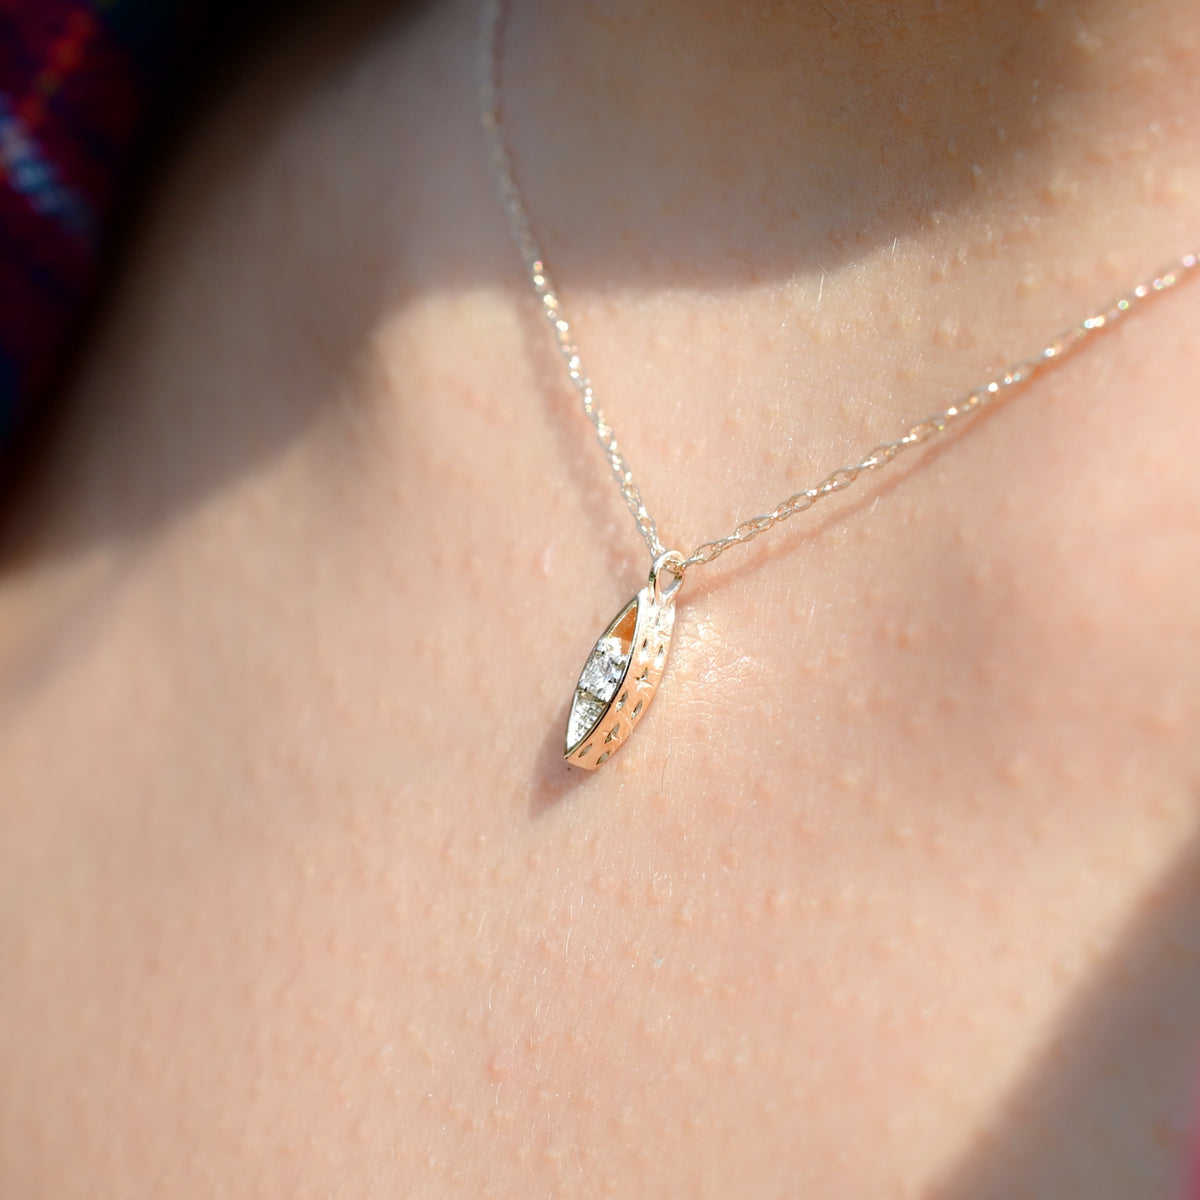 Solid 14k yellow gold pendant, chain, and clasp featuring a white diamond and a hand engraved star detail. Each Miarante piece is carefully handcrafted in Chicago by a skilled production team.